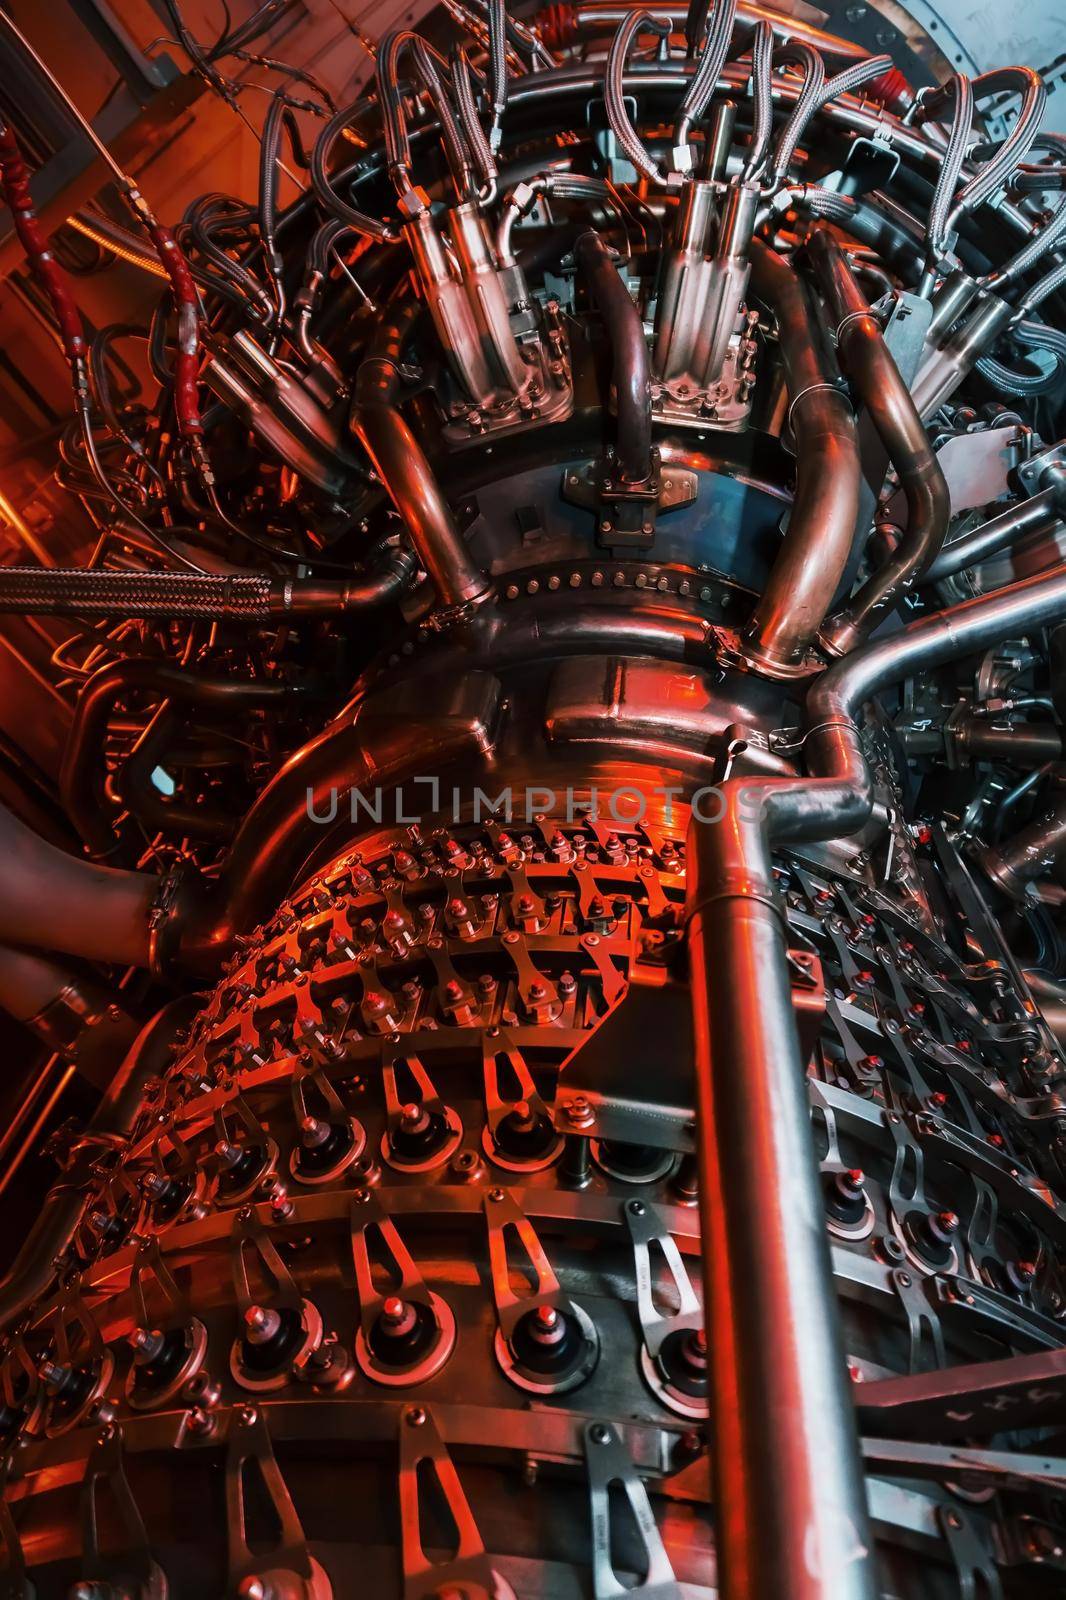 Parts of the operational gas turbine engine of a jet aircraft by AlexGrec